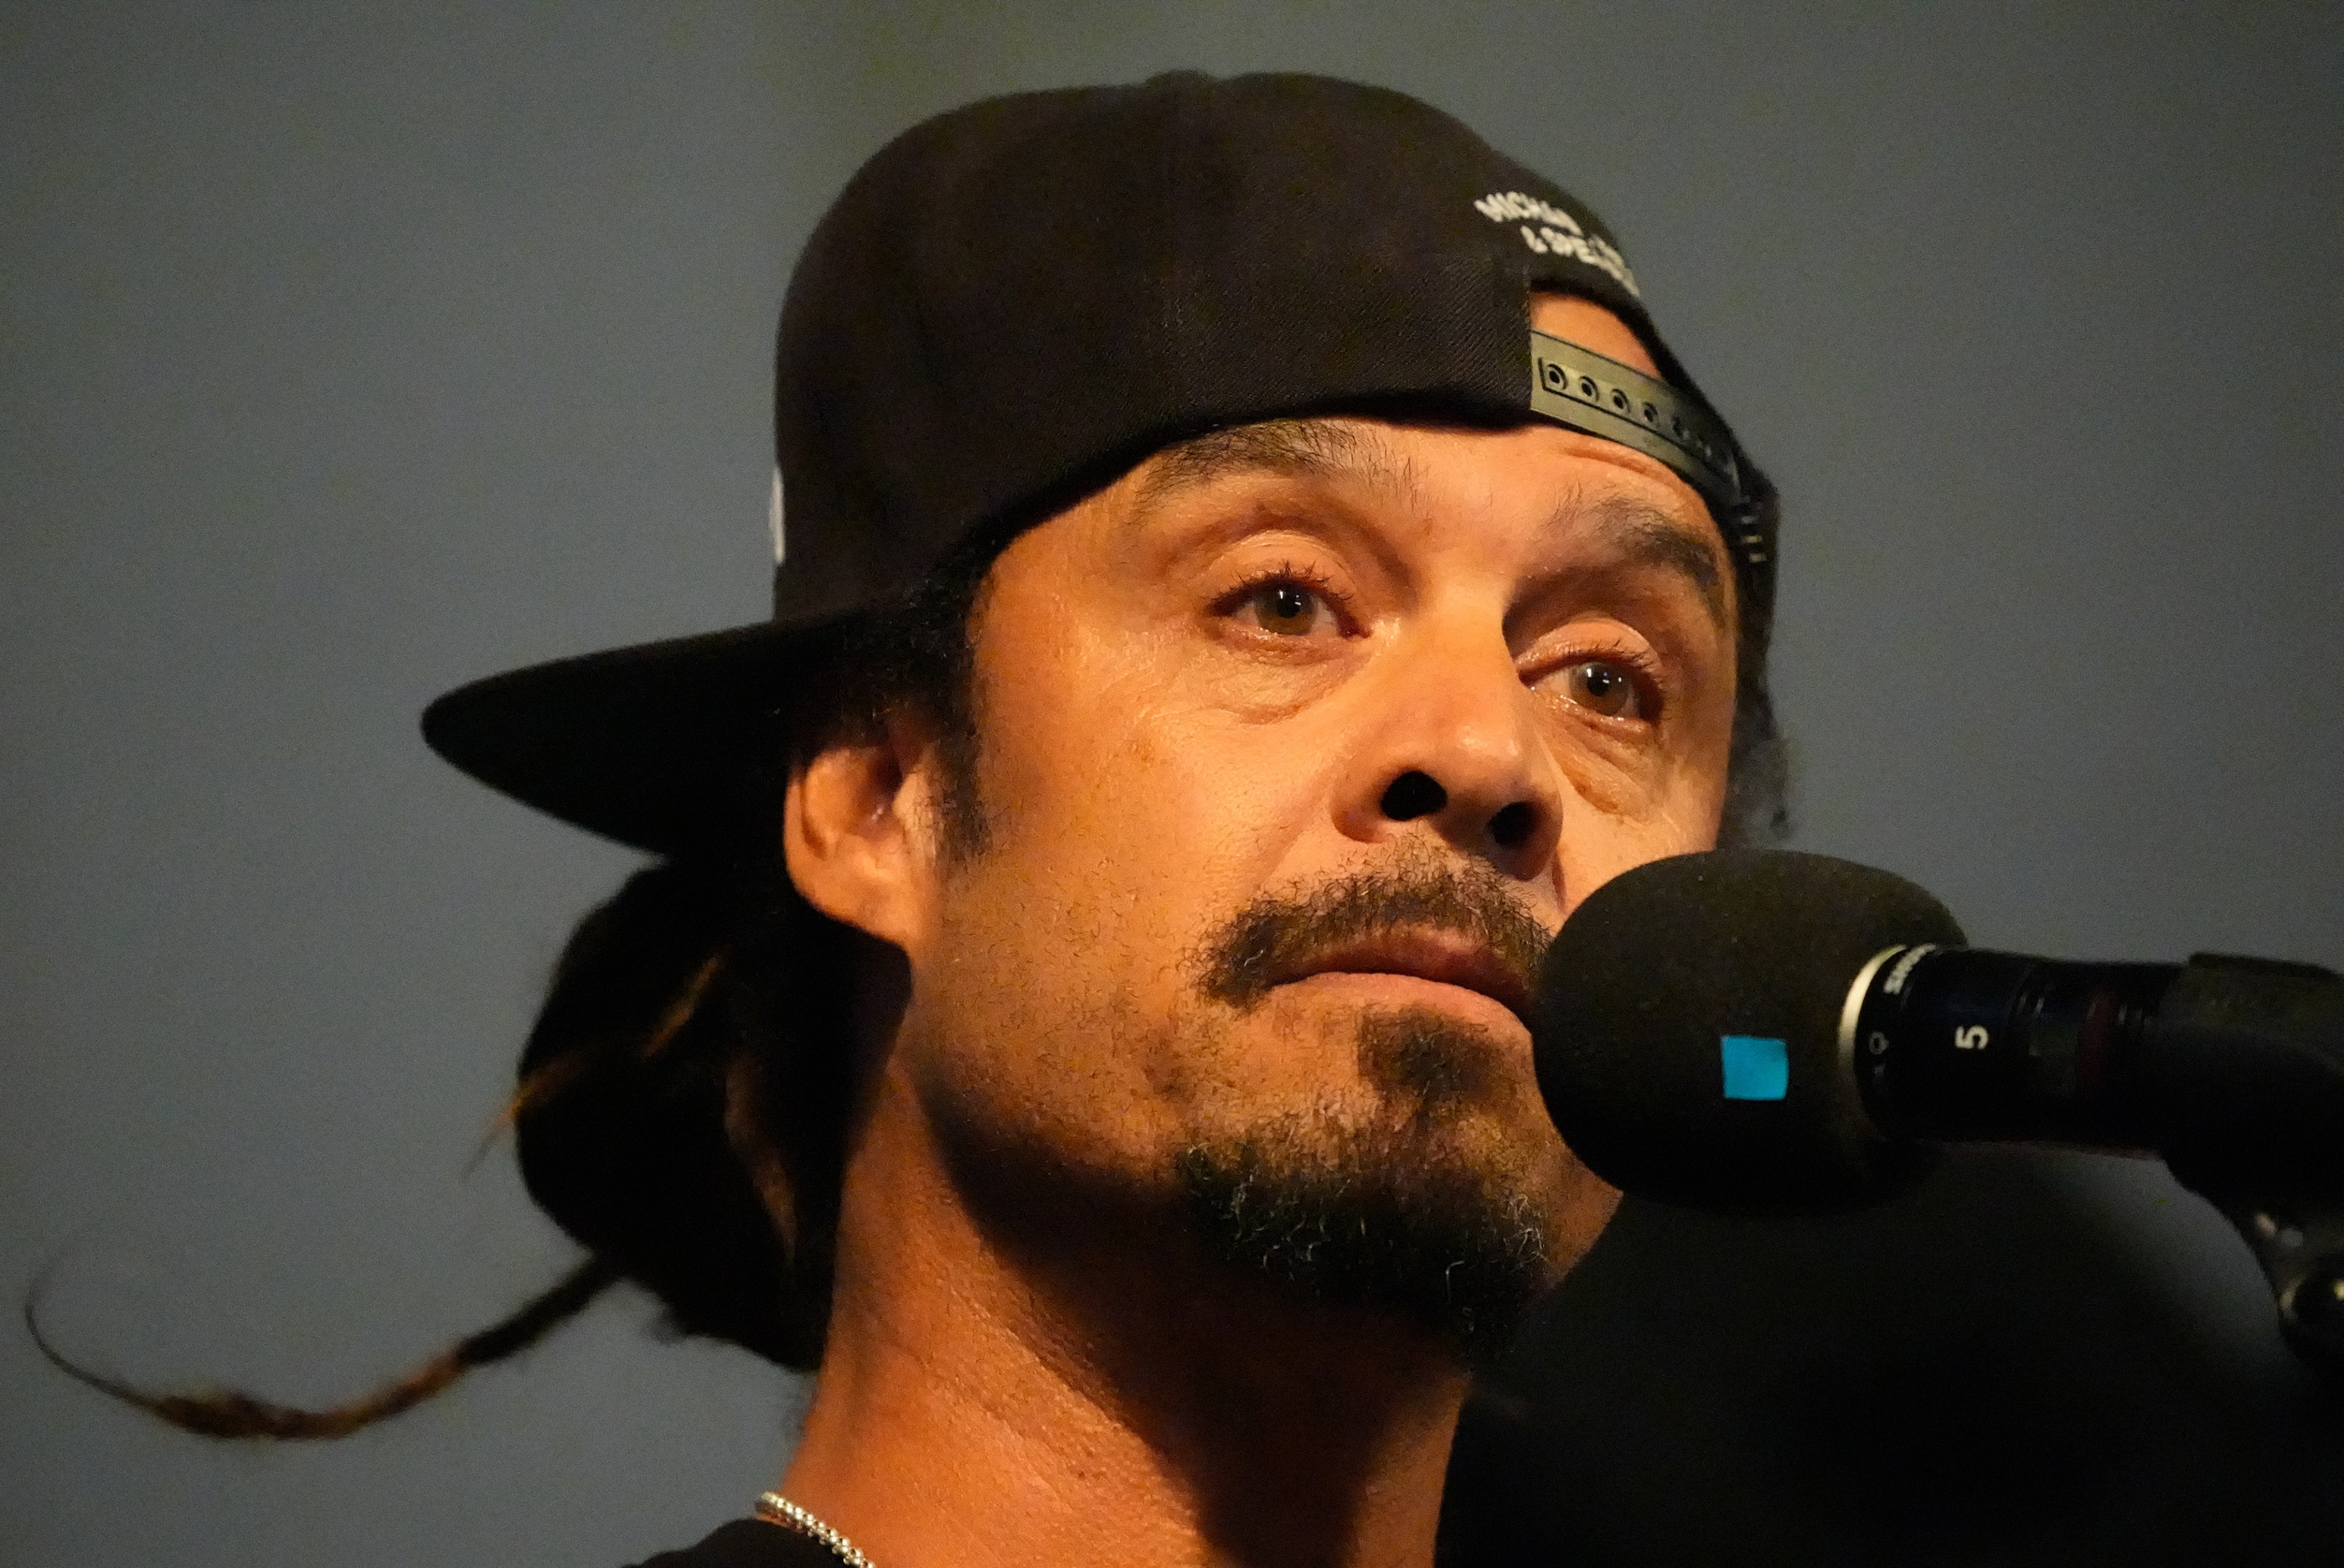 A man speaks into a microphone, wearing a cap, with a solemn expression and a thin mustache.